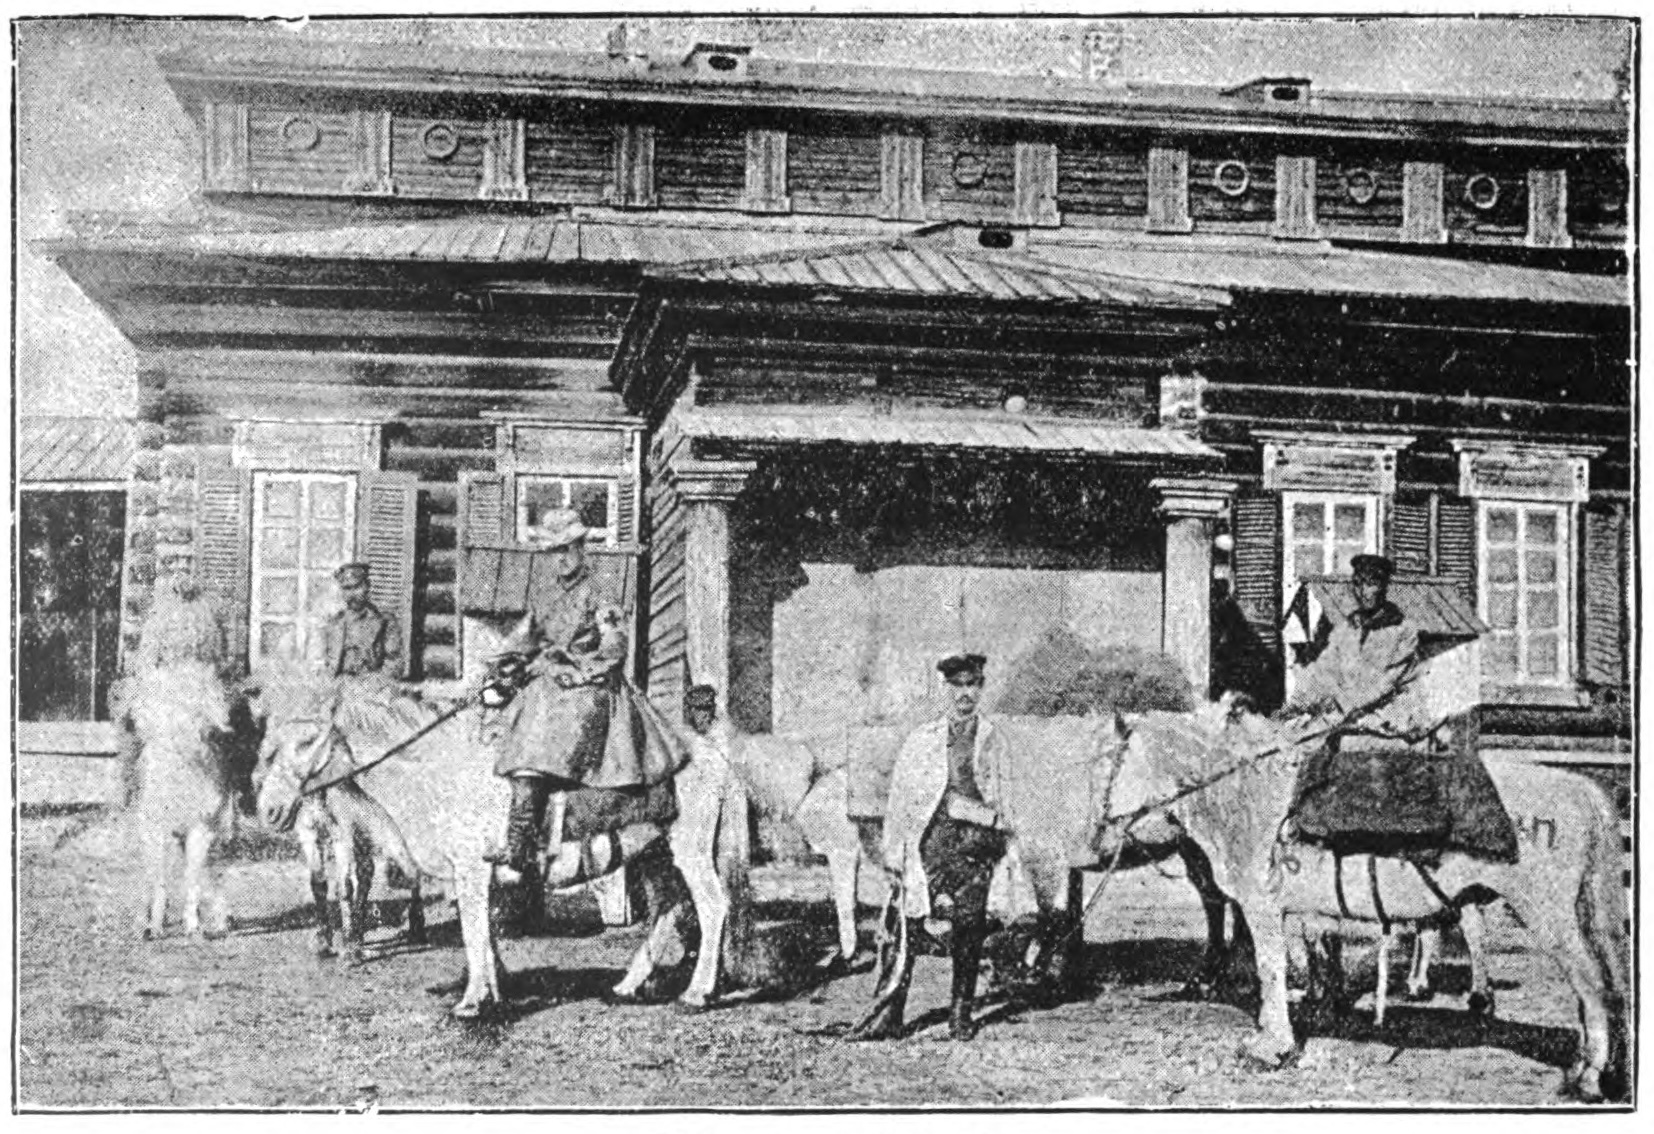 woman and several men on horses in front of a building